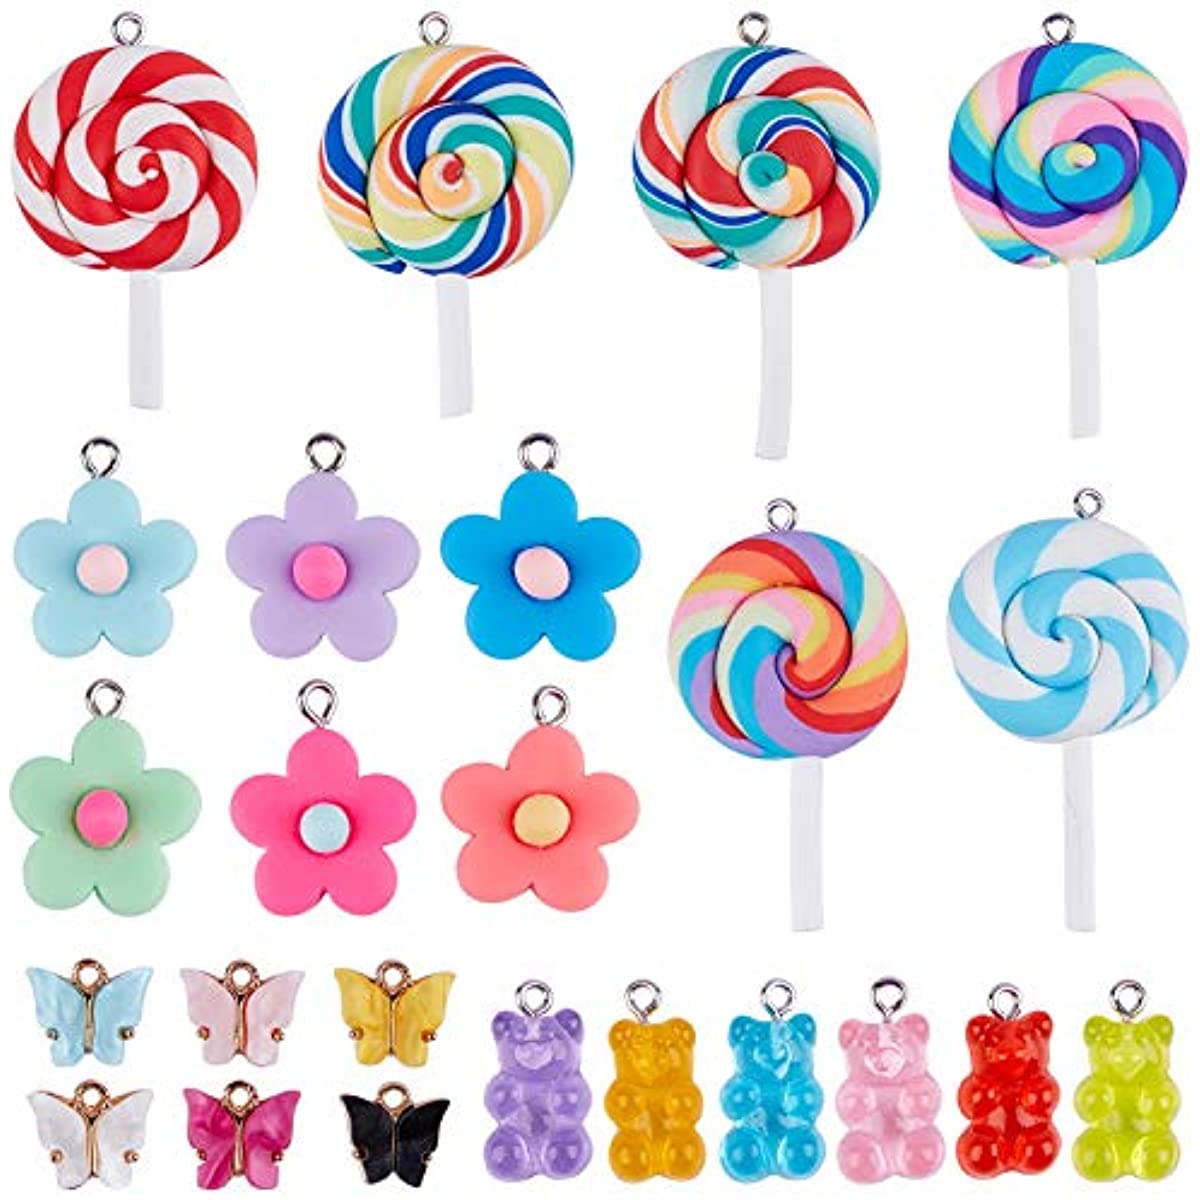 1 Box 48Pcs Candy Charms 4 Styles Lollipop Butterfly Bear Flower Charms  Polymer Clay Pendants for Earring Bracelet DIY Jewelry Making 